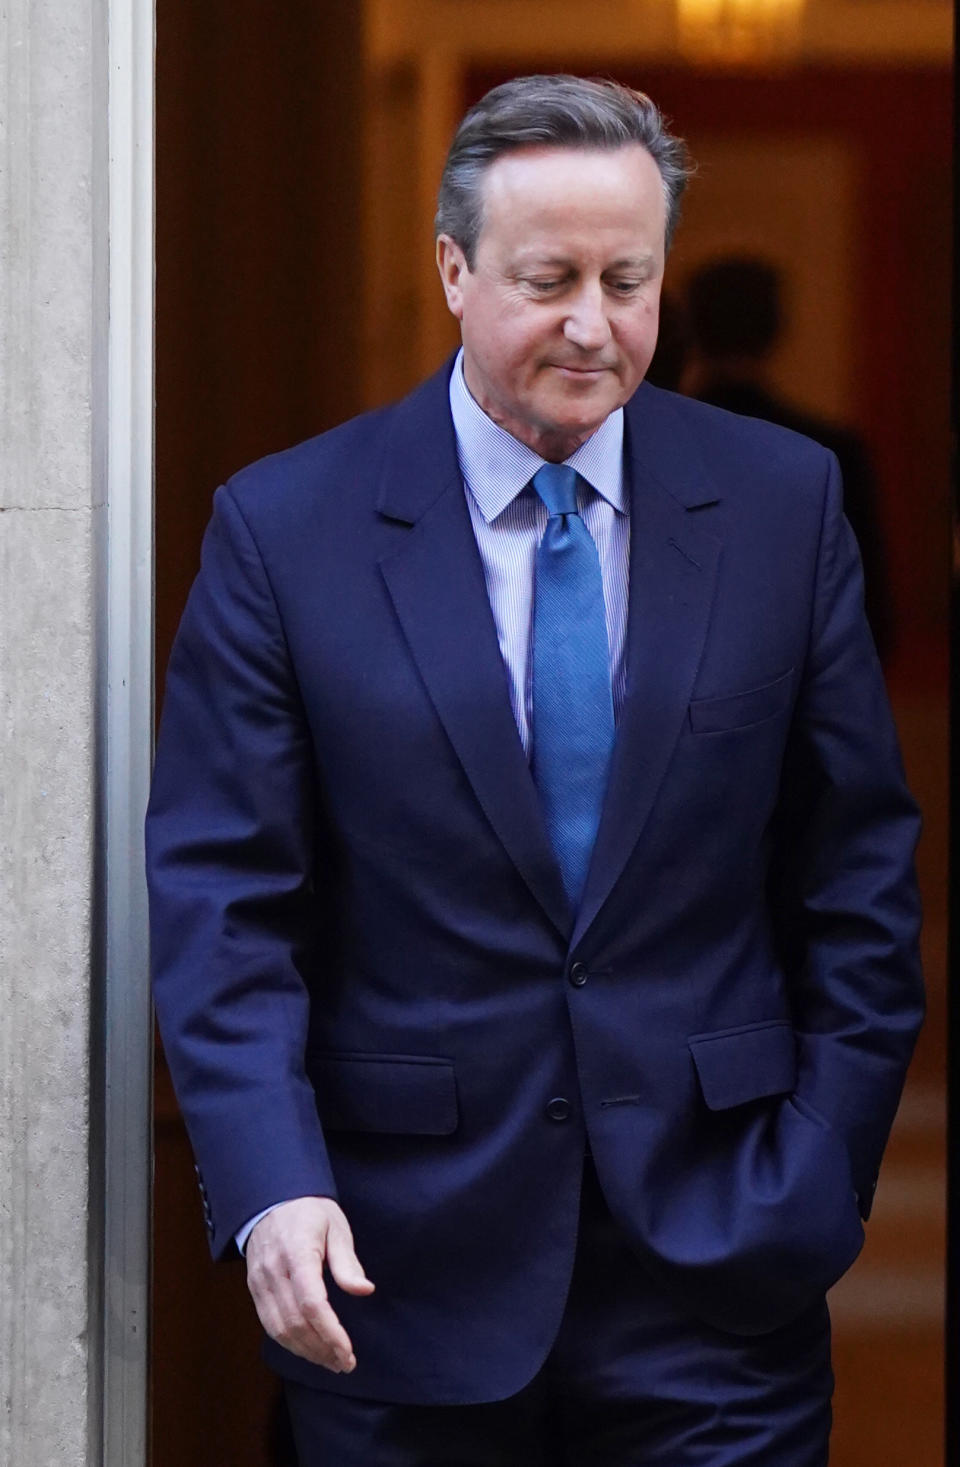 David Cameron leaves Downing Street after being appointed foreign secretary. (PA)